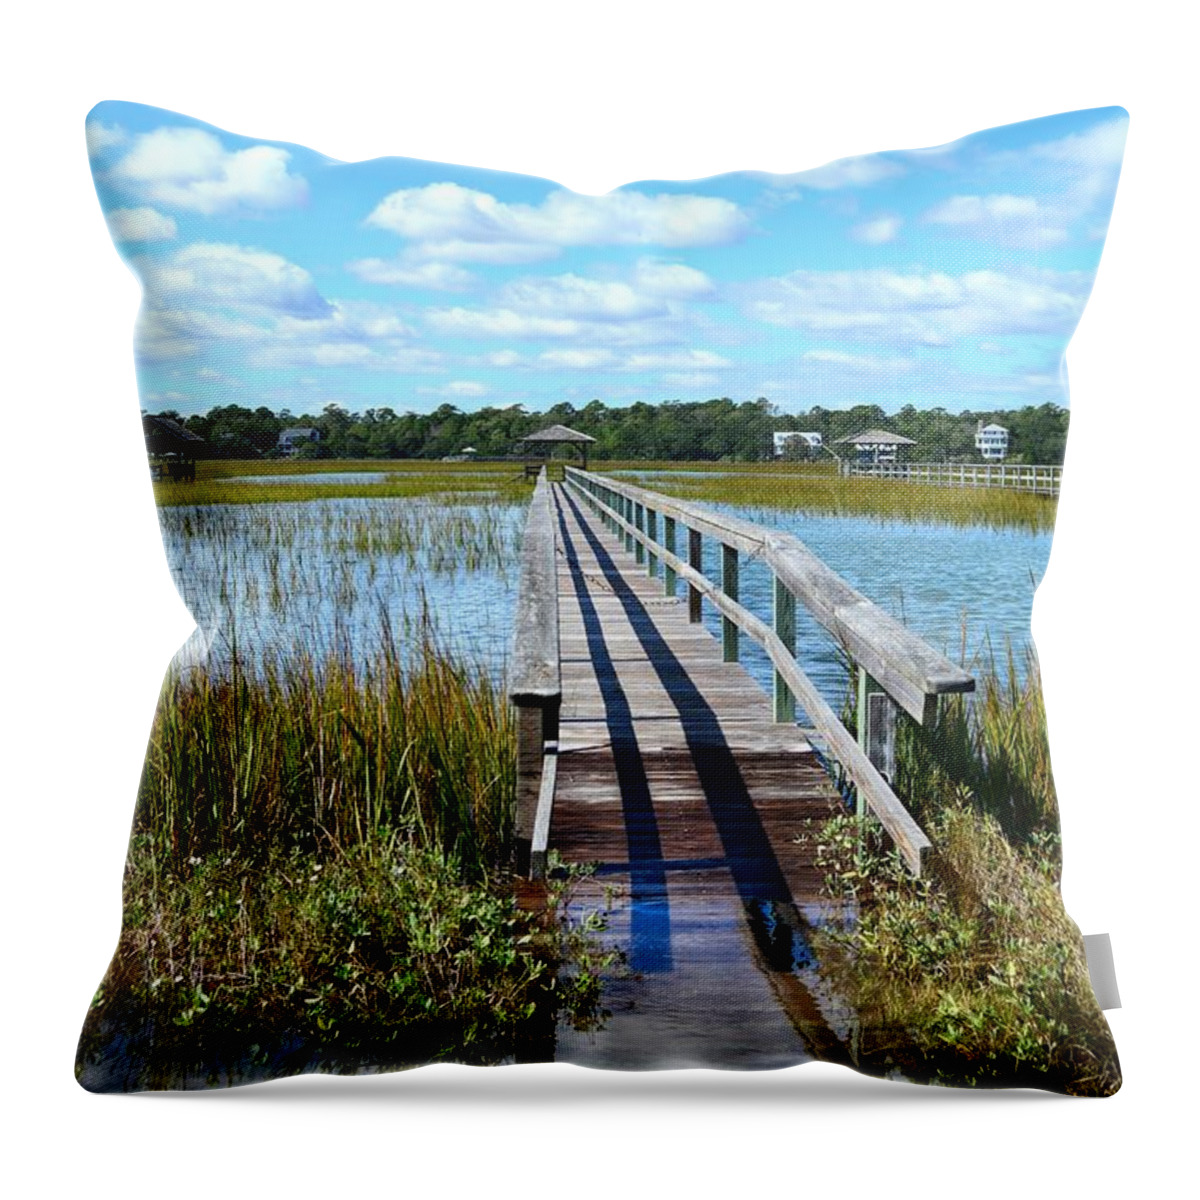 Scenic Throw Pillow featuring the photograph High Tide At Pawleys Island by Kathy Baccari